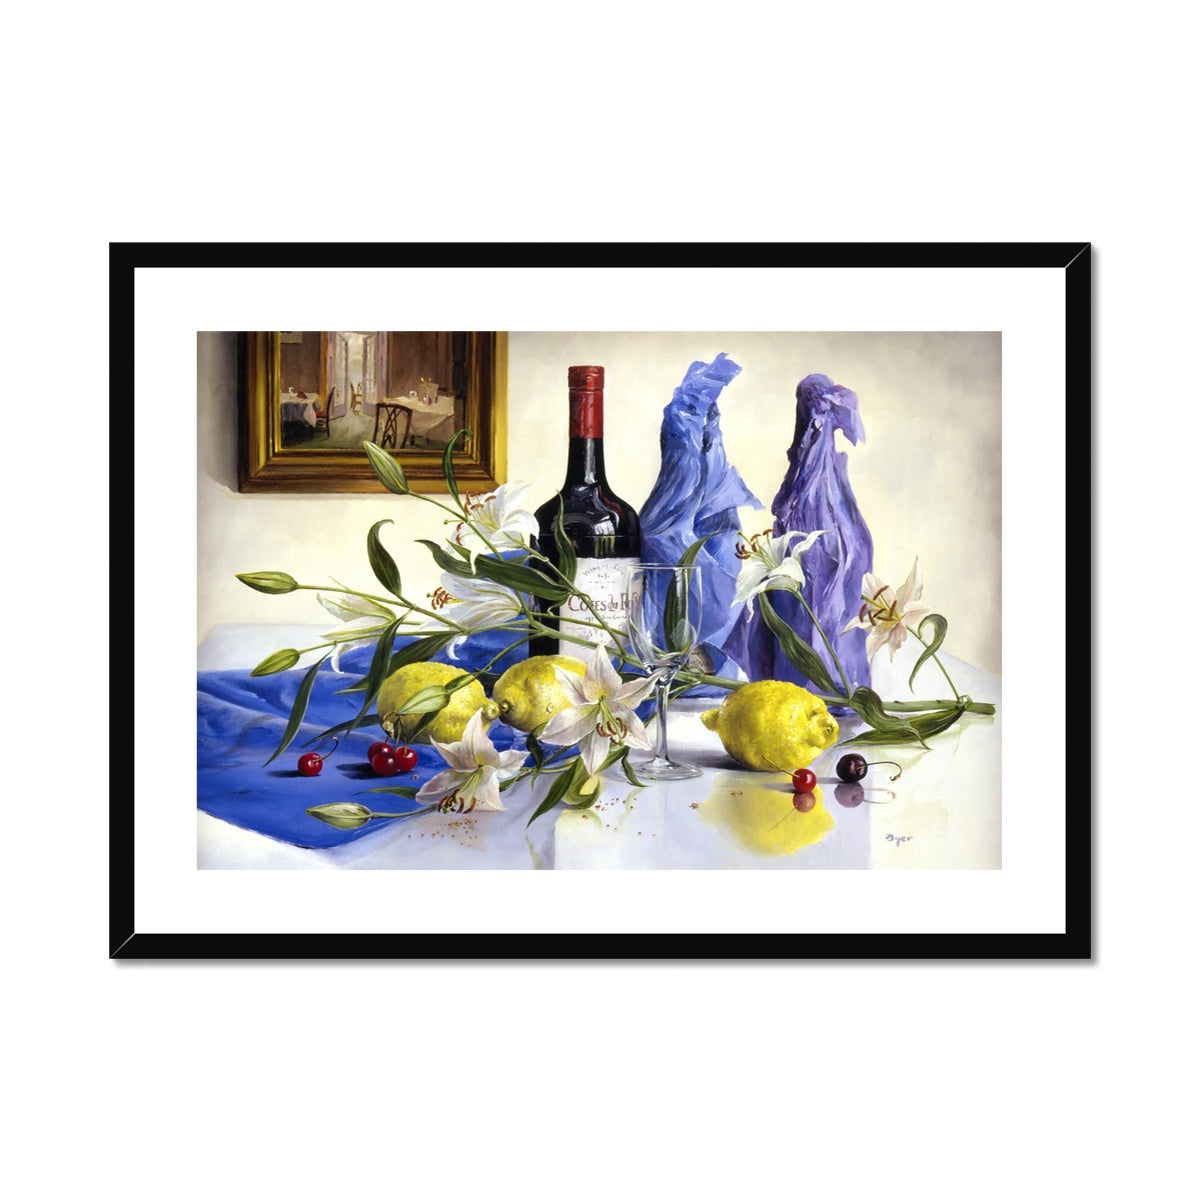 Ted Dyer Framed Open Edition Cornish Fine Art Print. &#39;White Lilies, Lemons and Red Wine Still Life&#39;. Cornwall Art Gallery